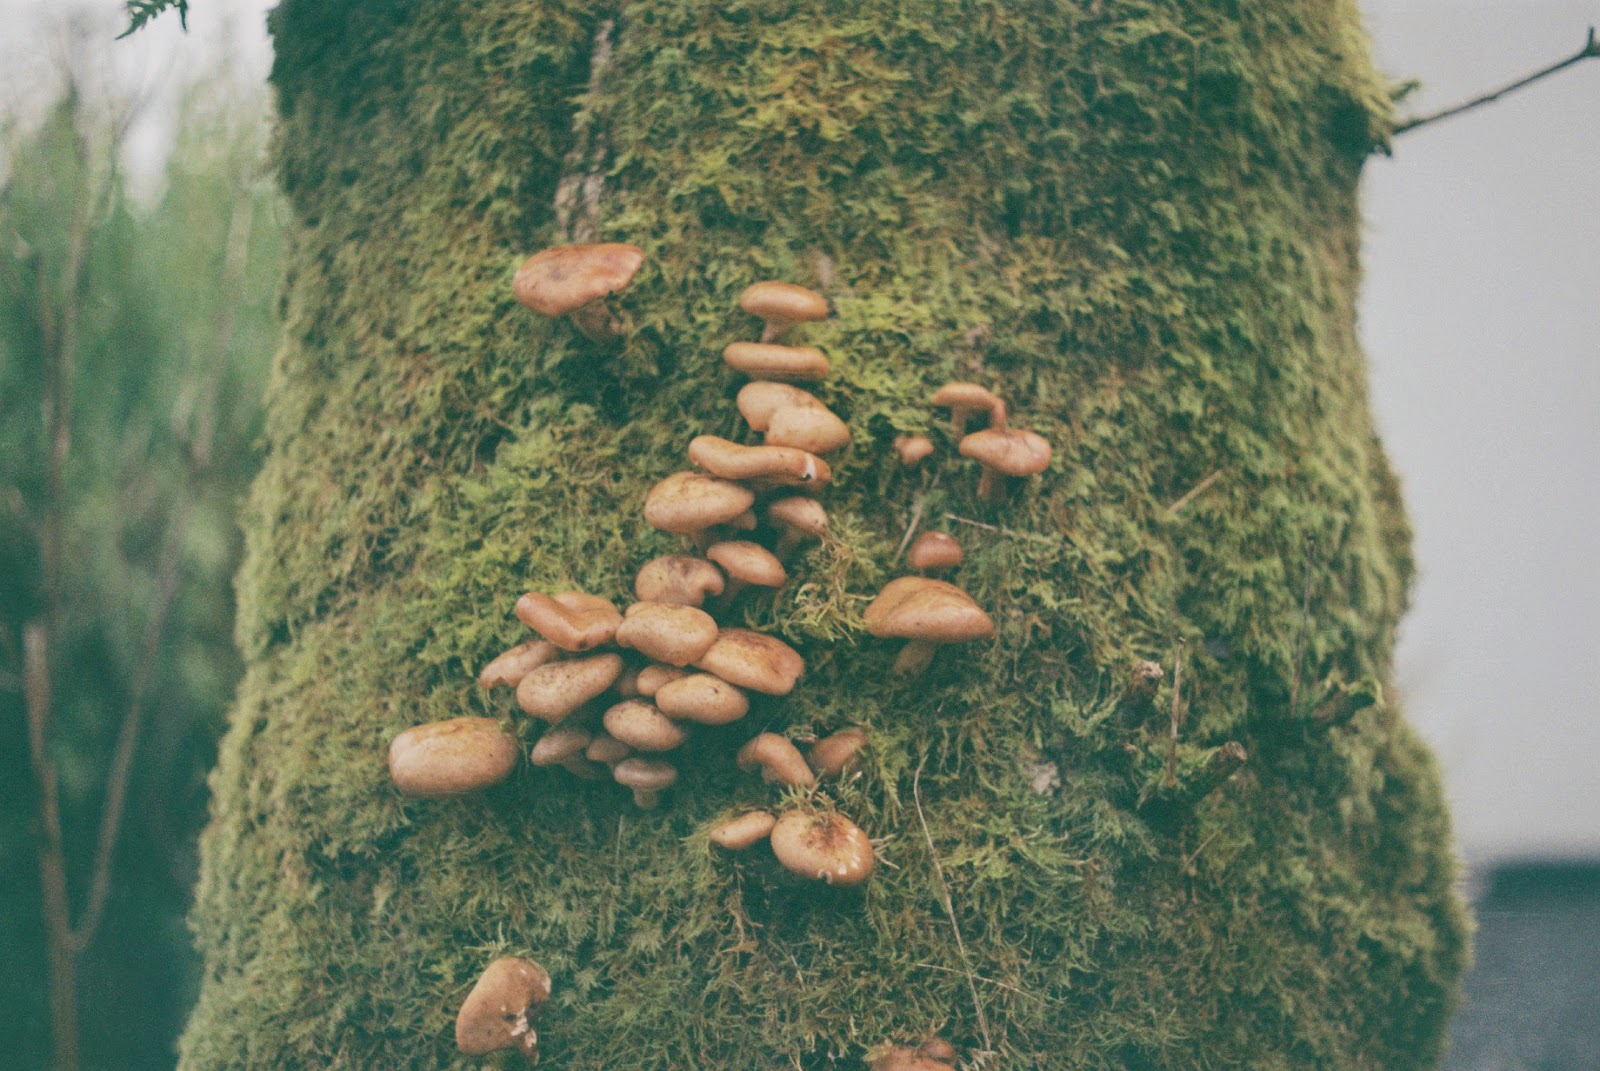 A close up of brown mushrooms growing on a mossy tree trunk.